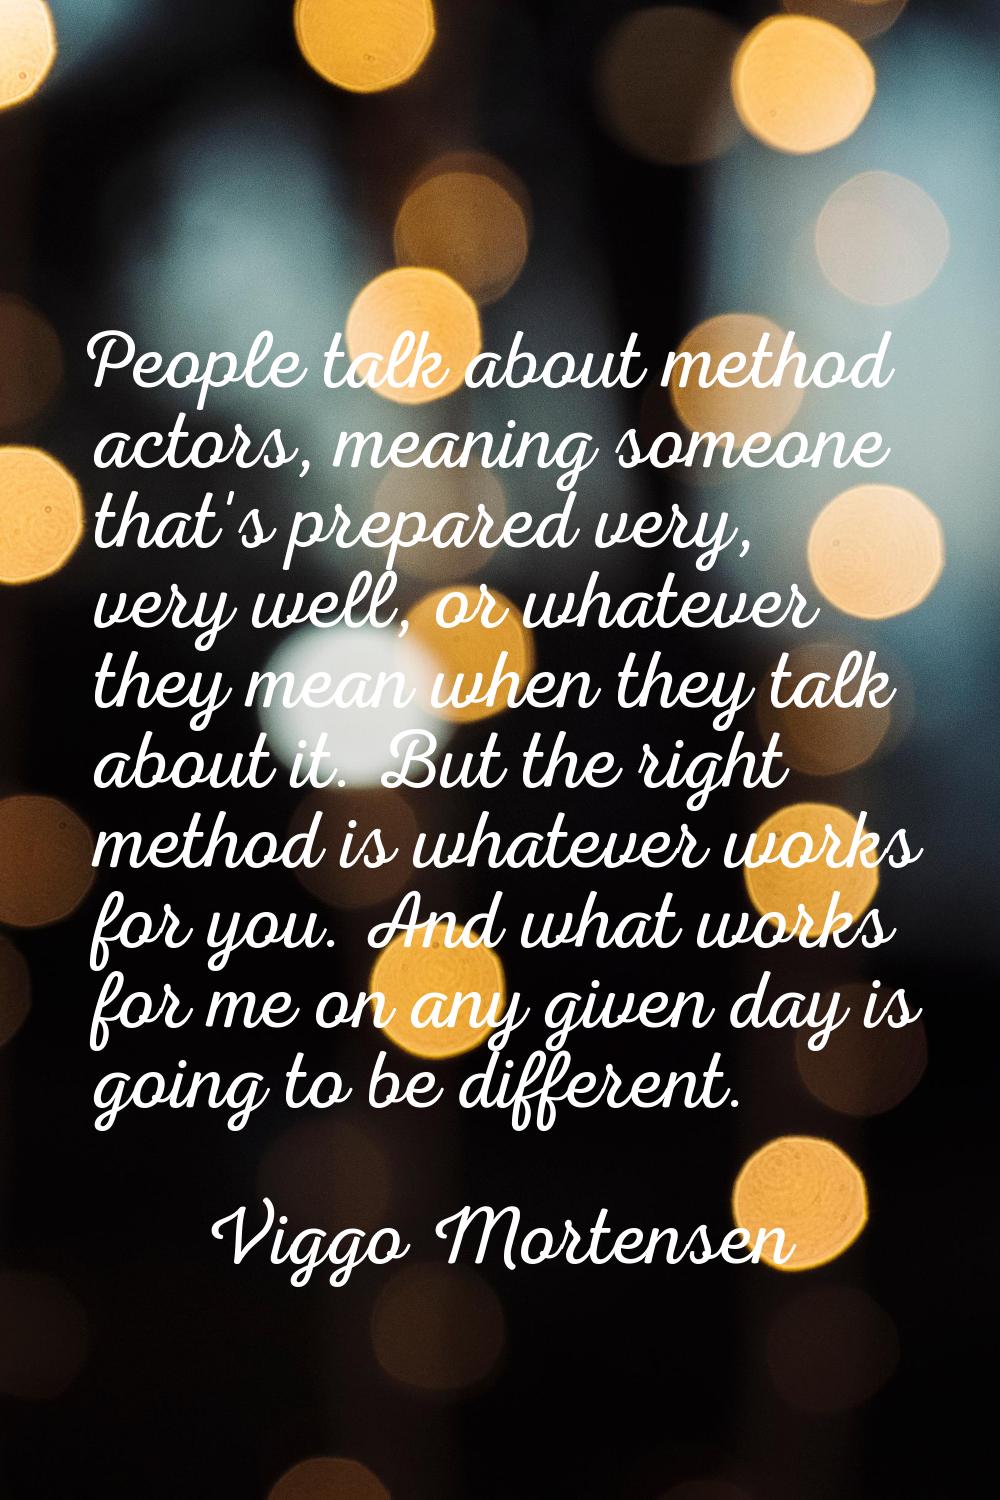 People talk about method actors, meaning someone that's prepared very, very well, or whatever they 